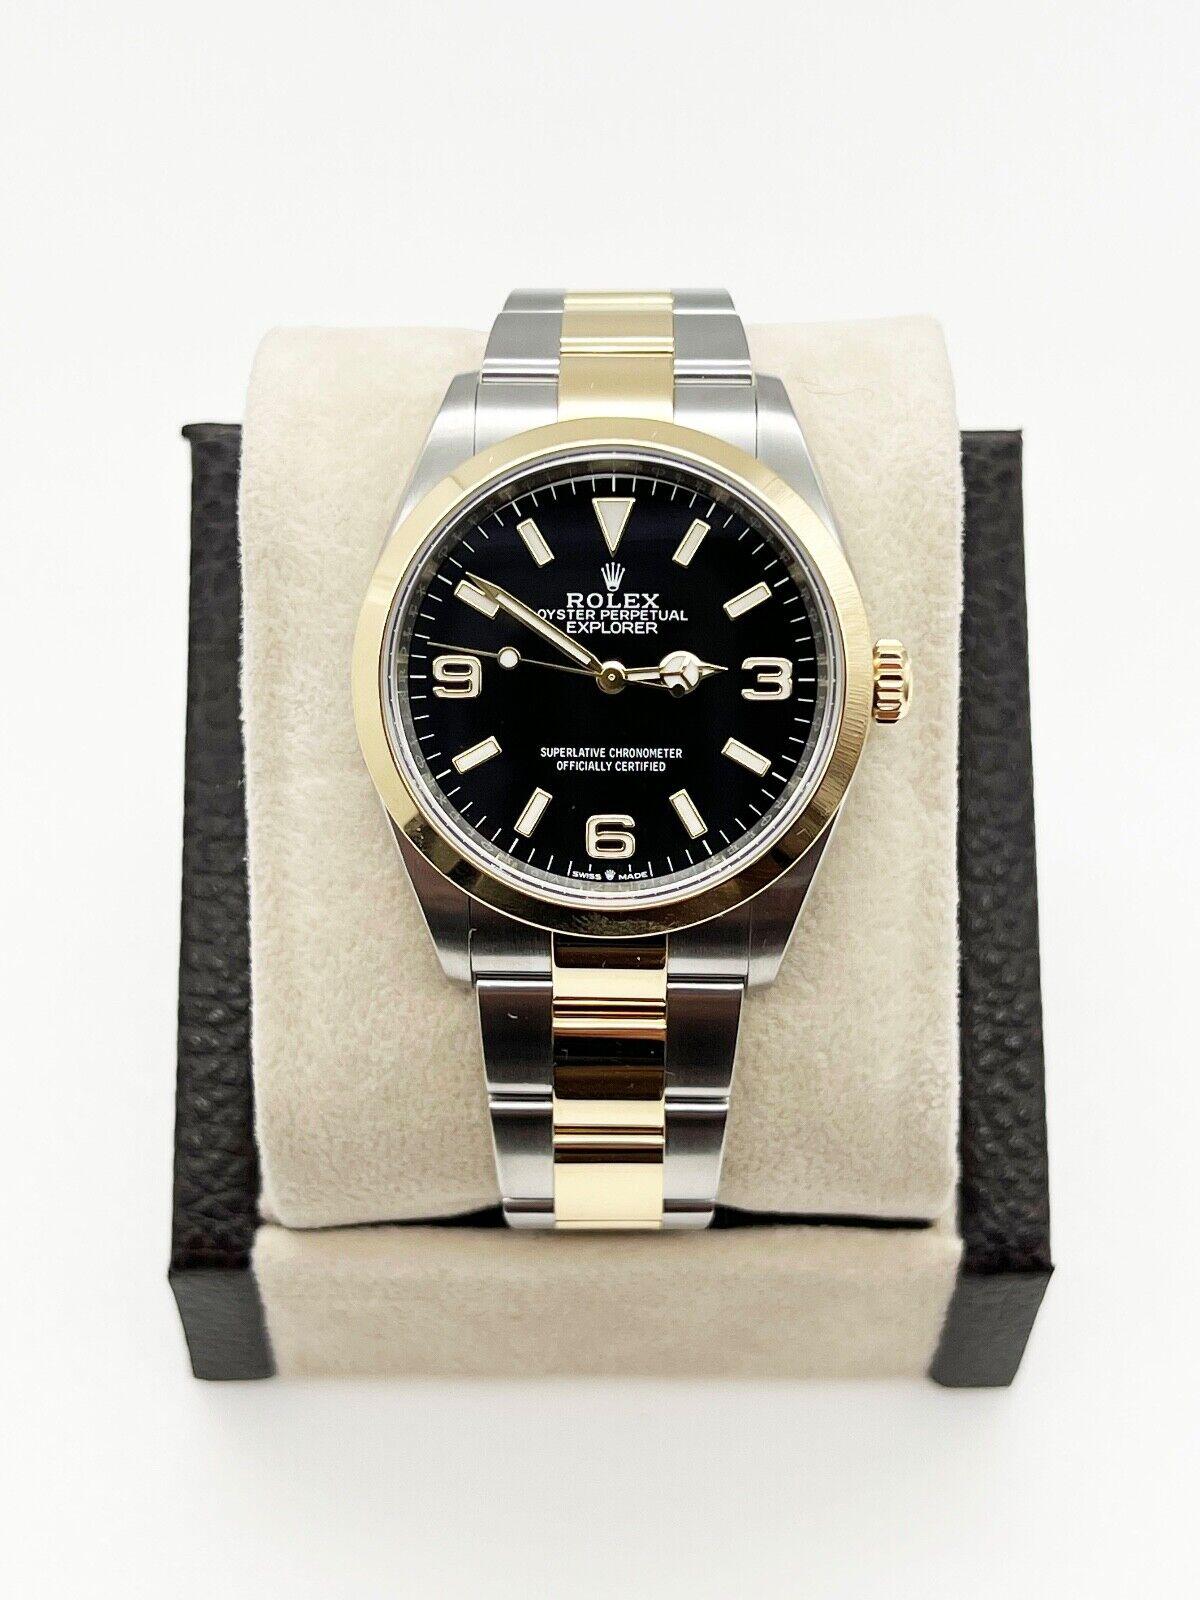 Rolex Explorer 124273 Black Dial 18K Yellow Gold Steel Box Booklet 36mm In Excellent Condition For Sale In San Diego, CA